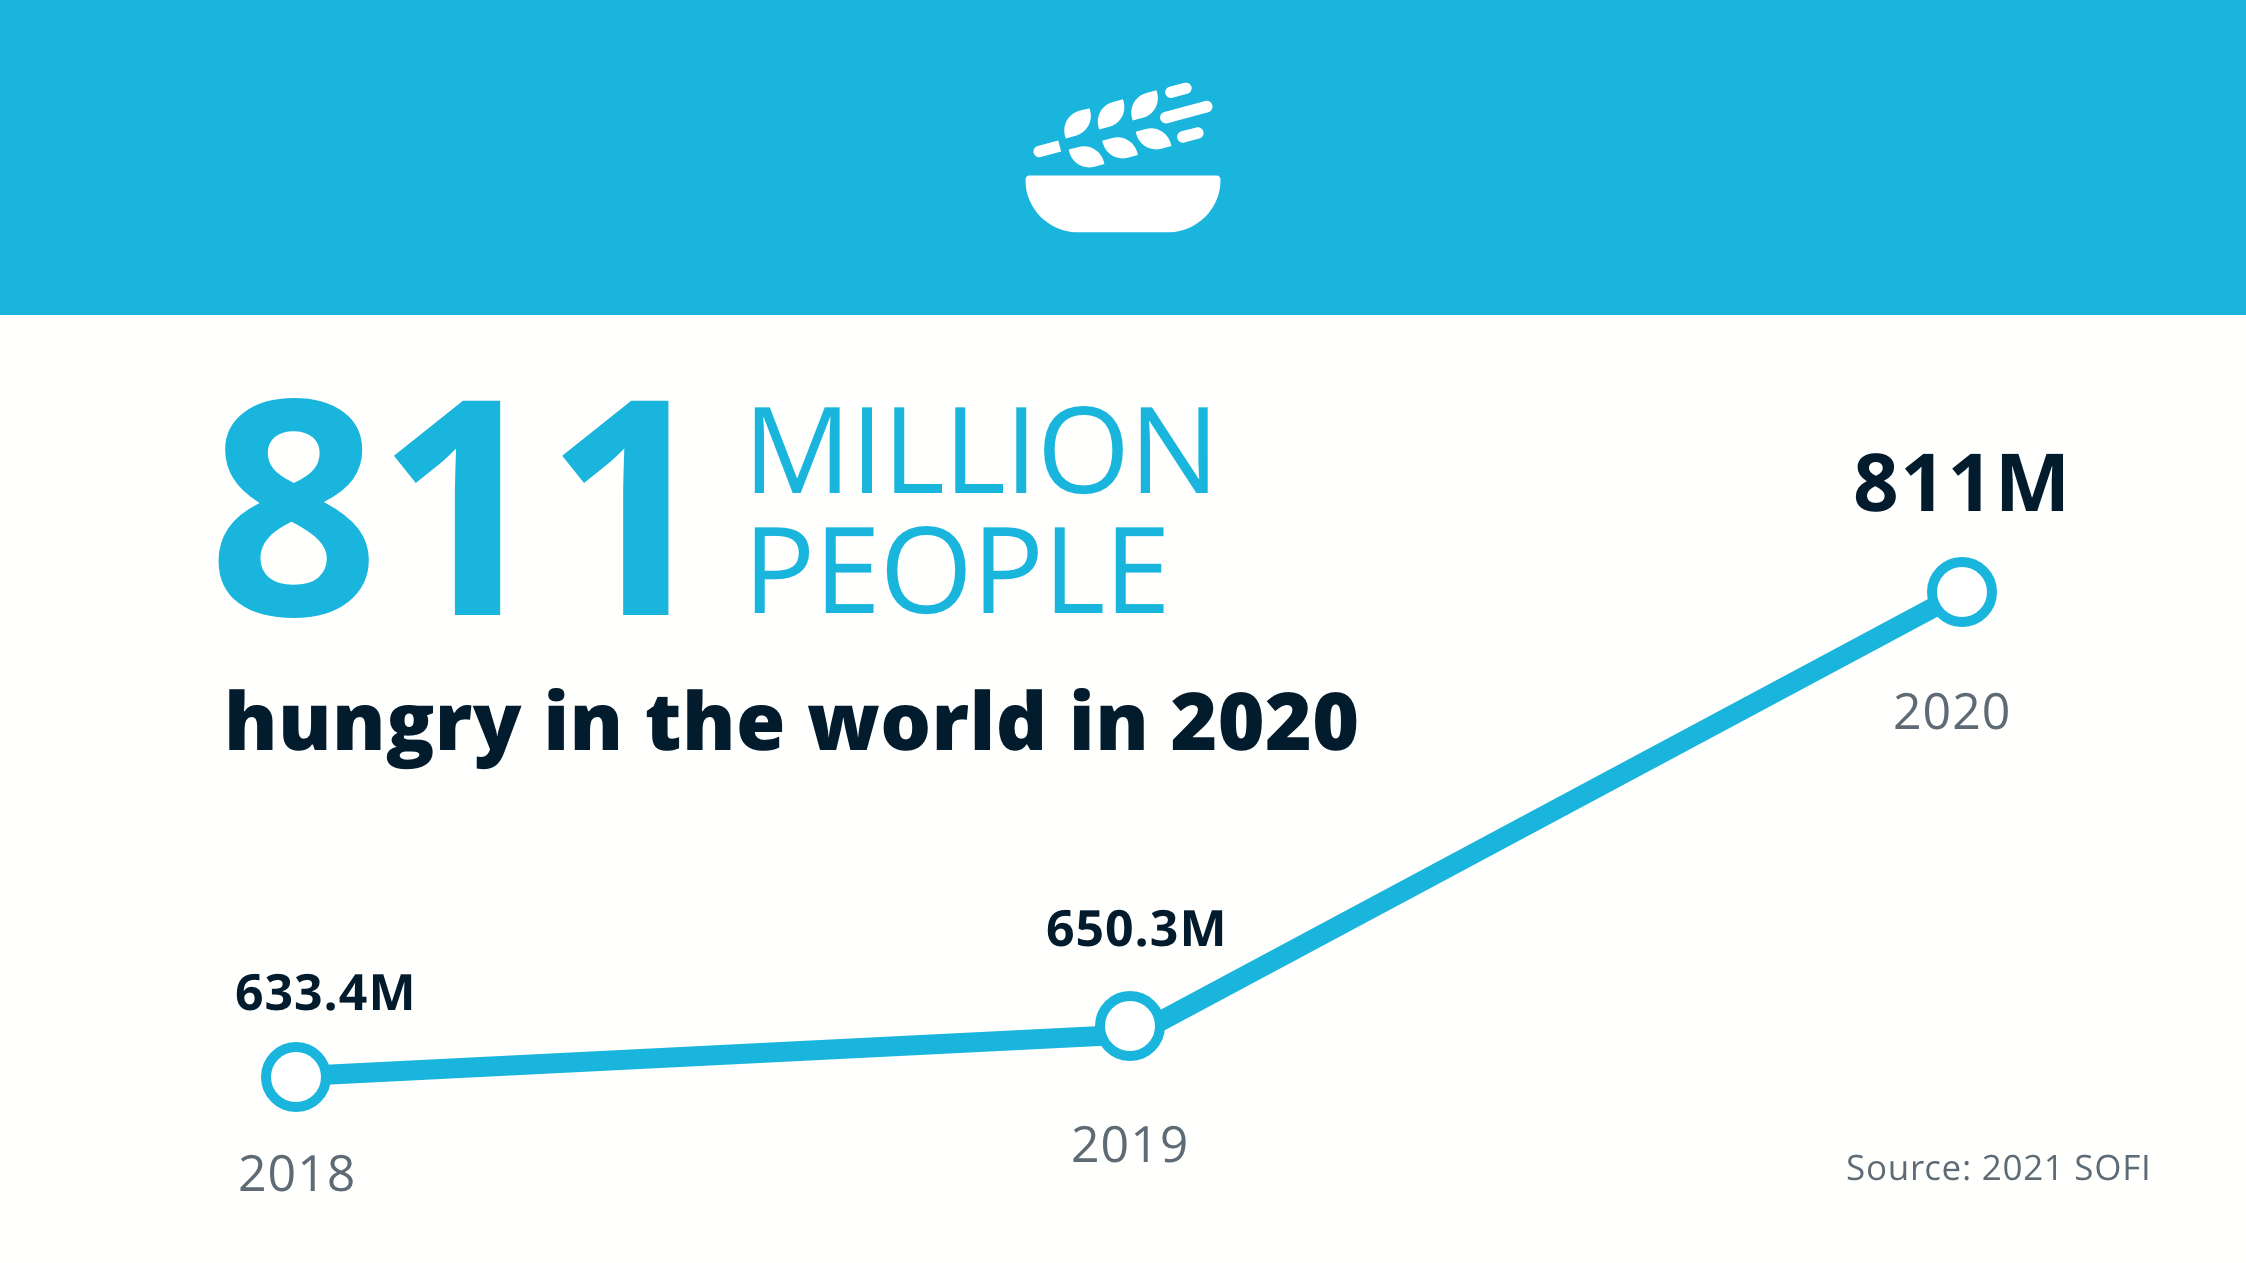 811 million people hungry in the world in 2020